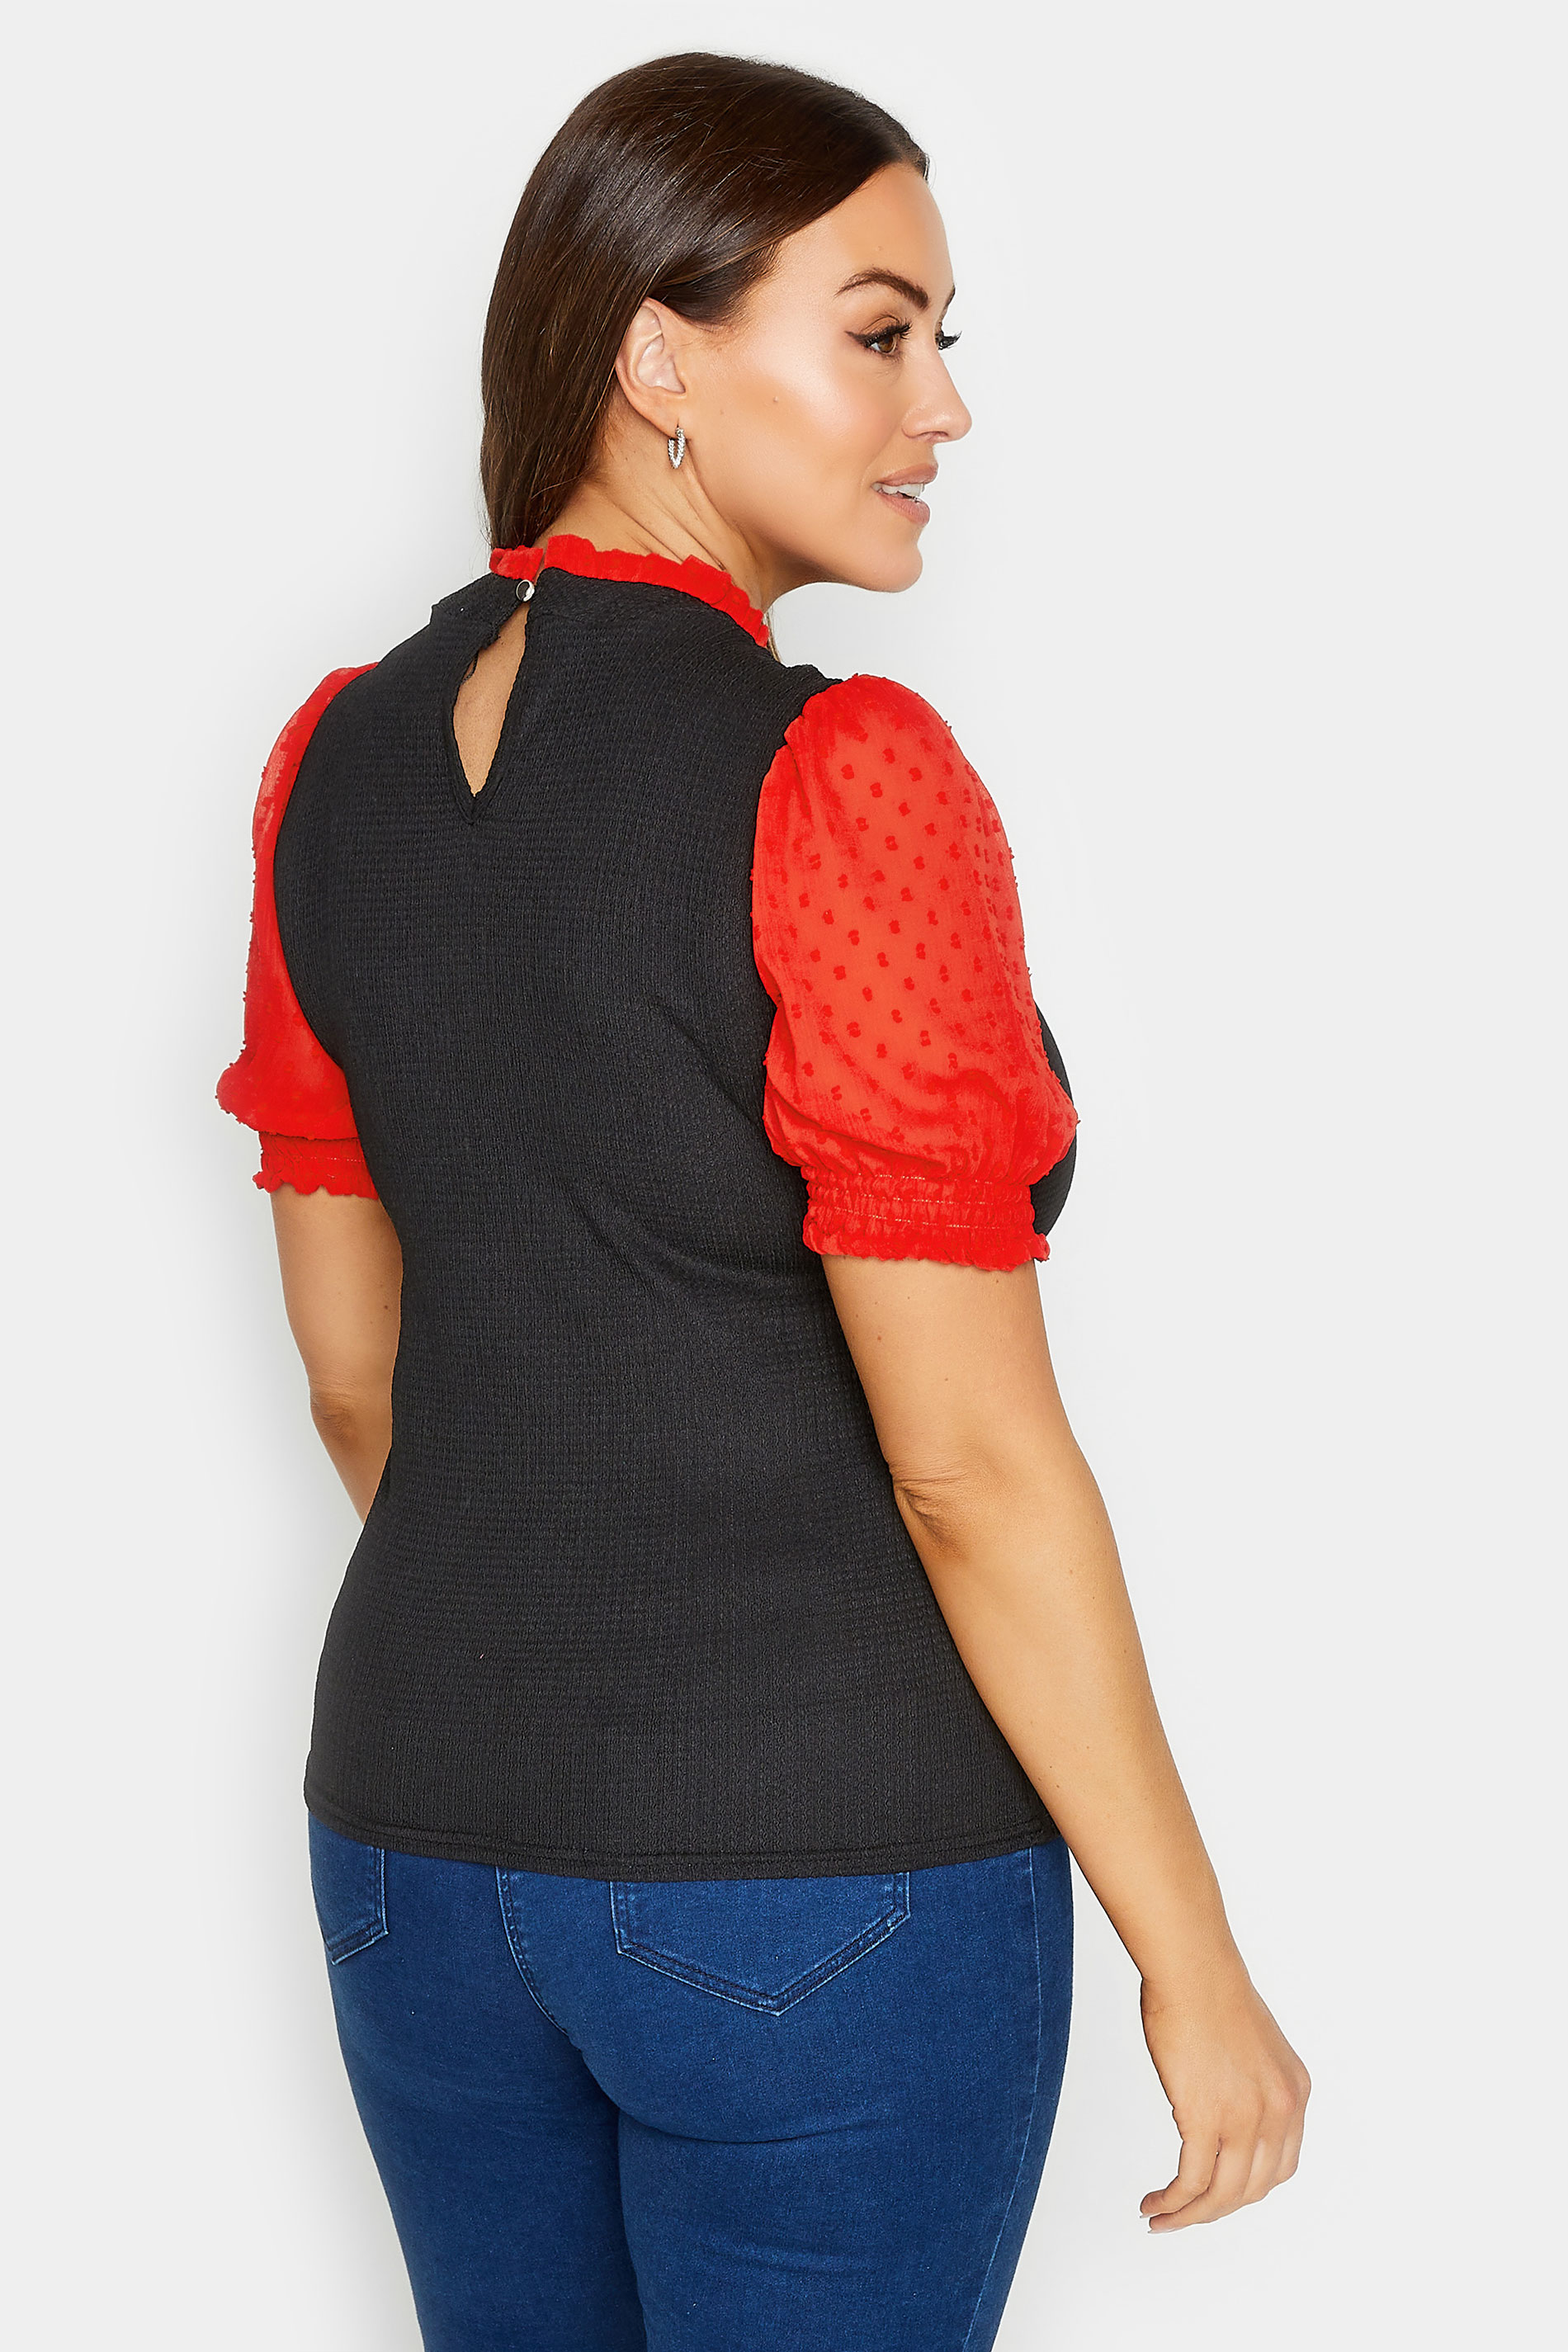 M&Co Black & Red Contrast Sleeve Blouse | M&Co 3